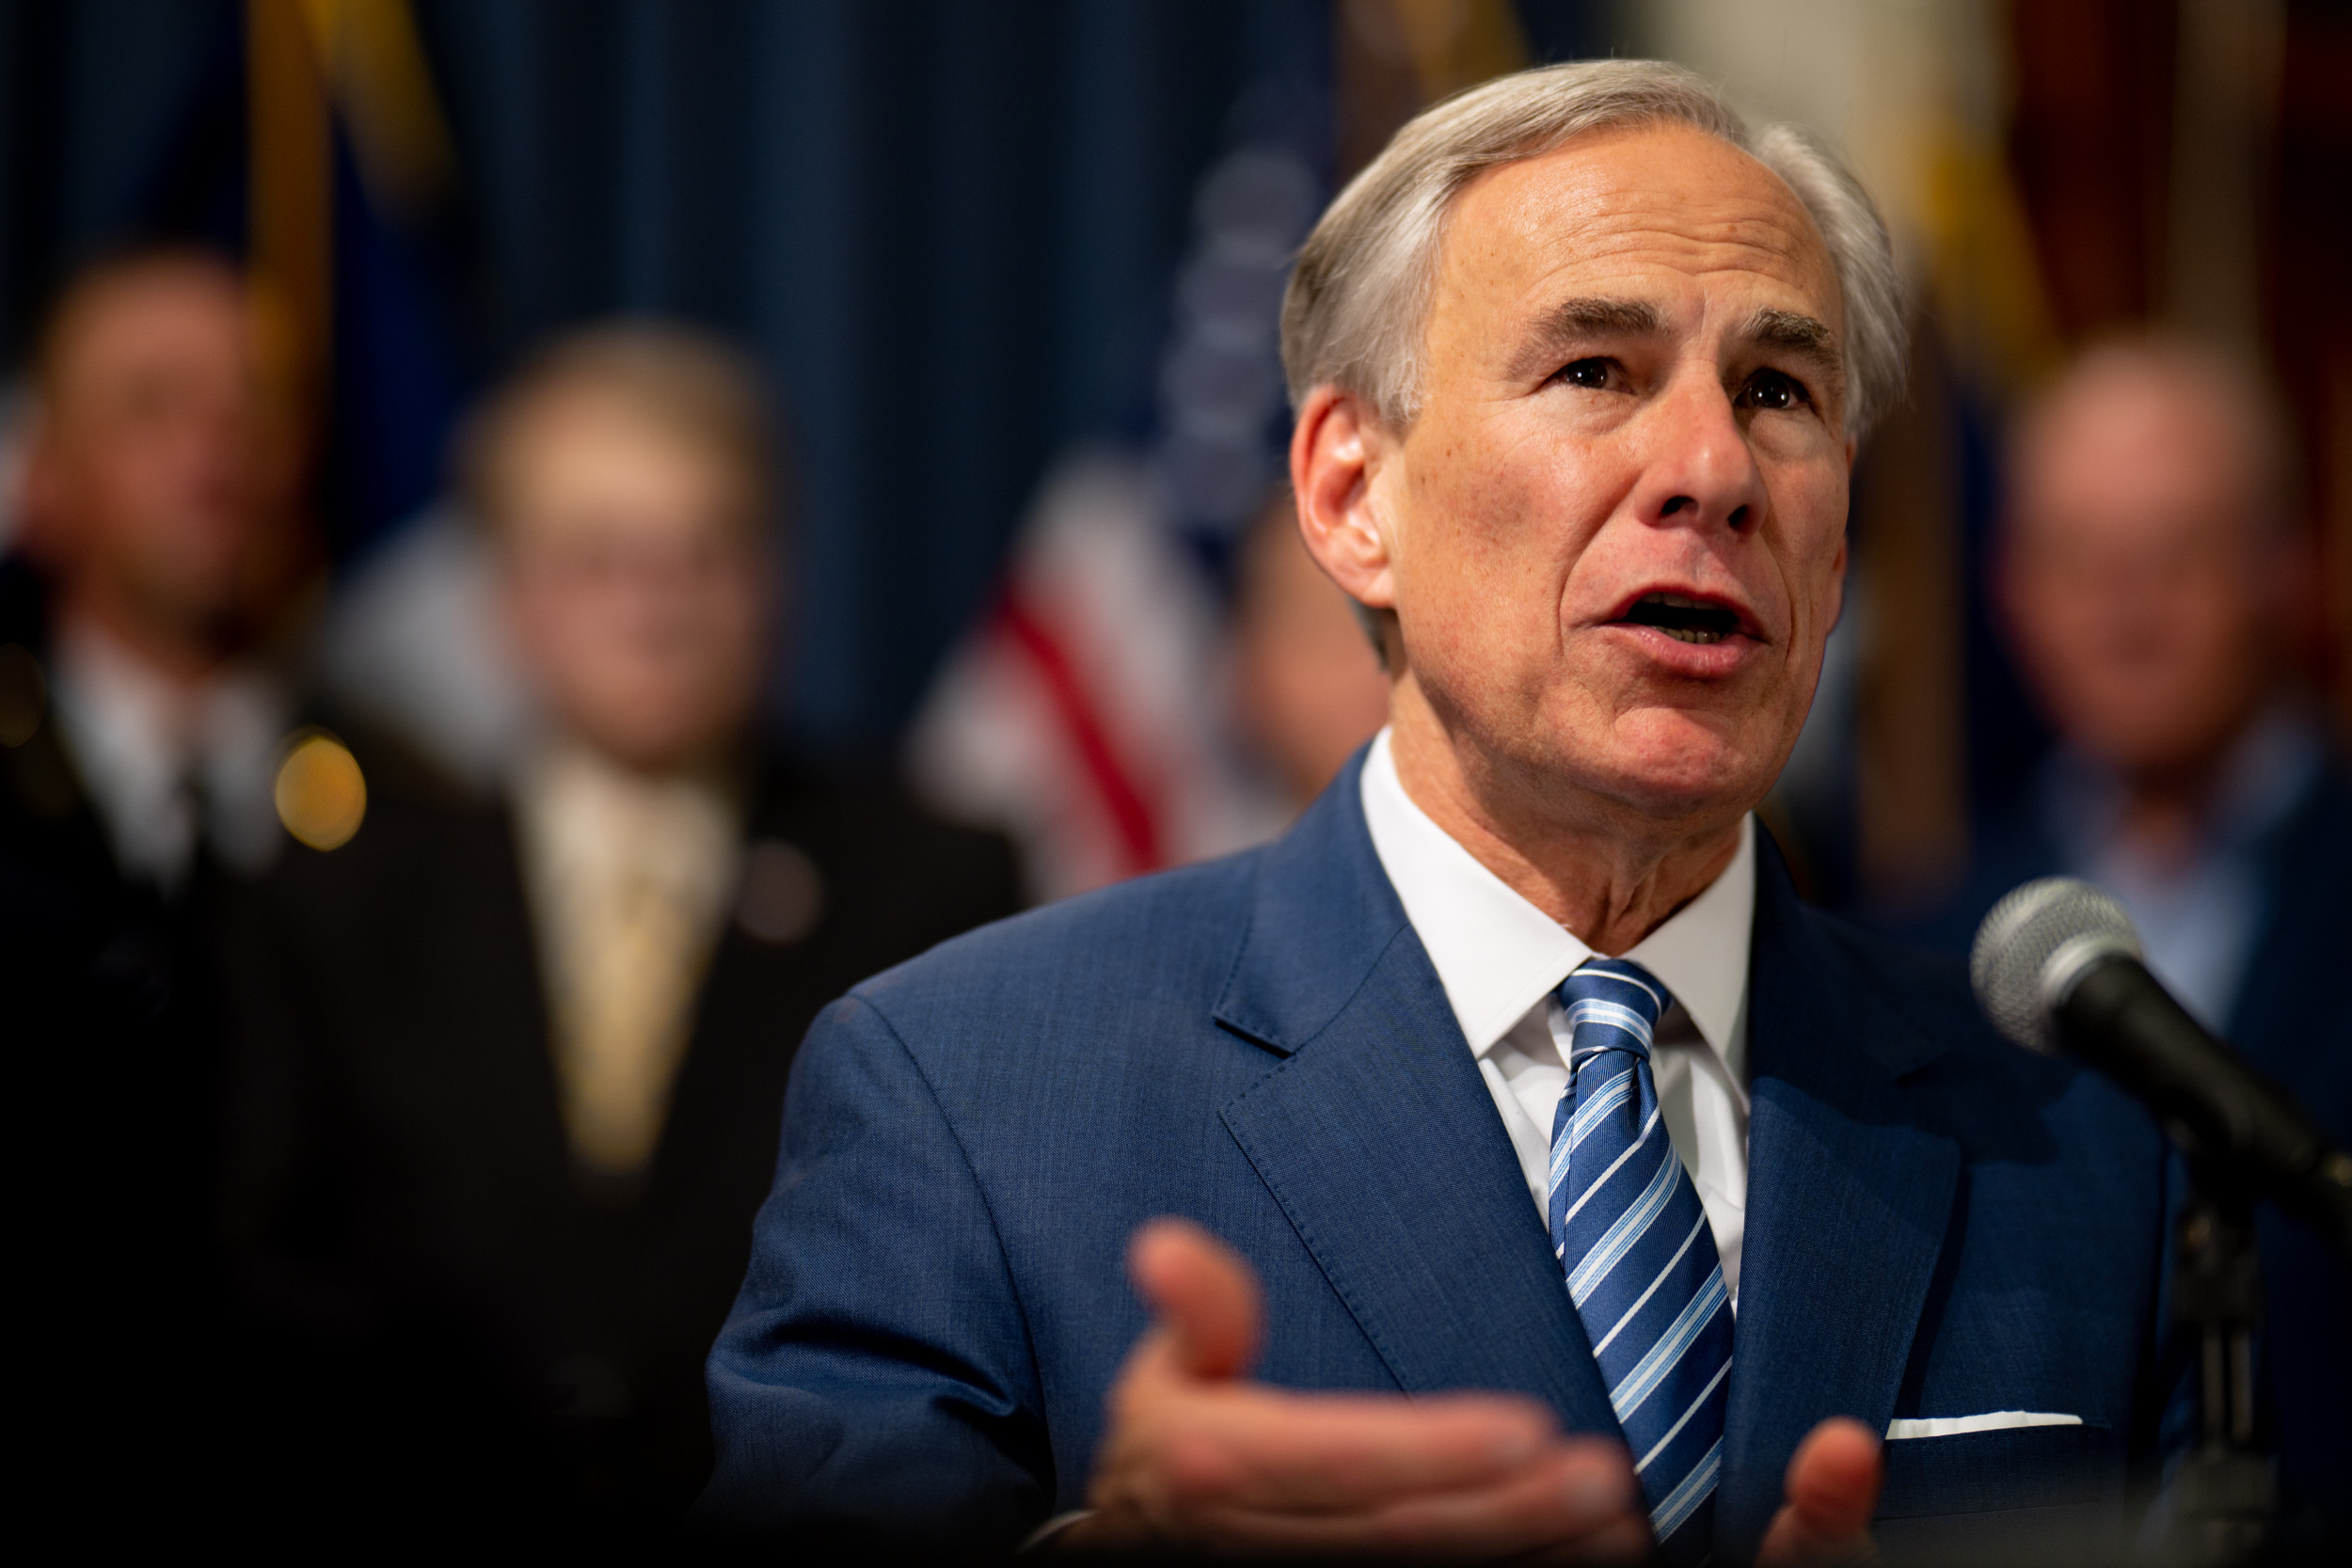 Map Exhibits 25 States Now Backing Greg Abbott in Border Feud